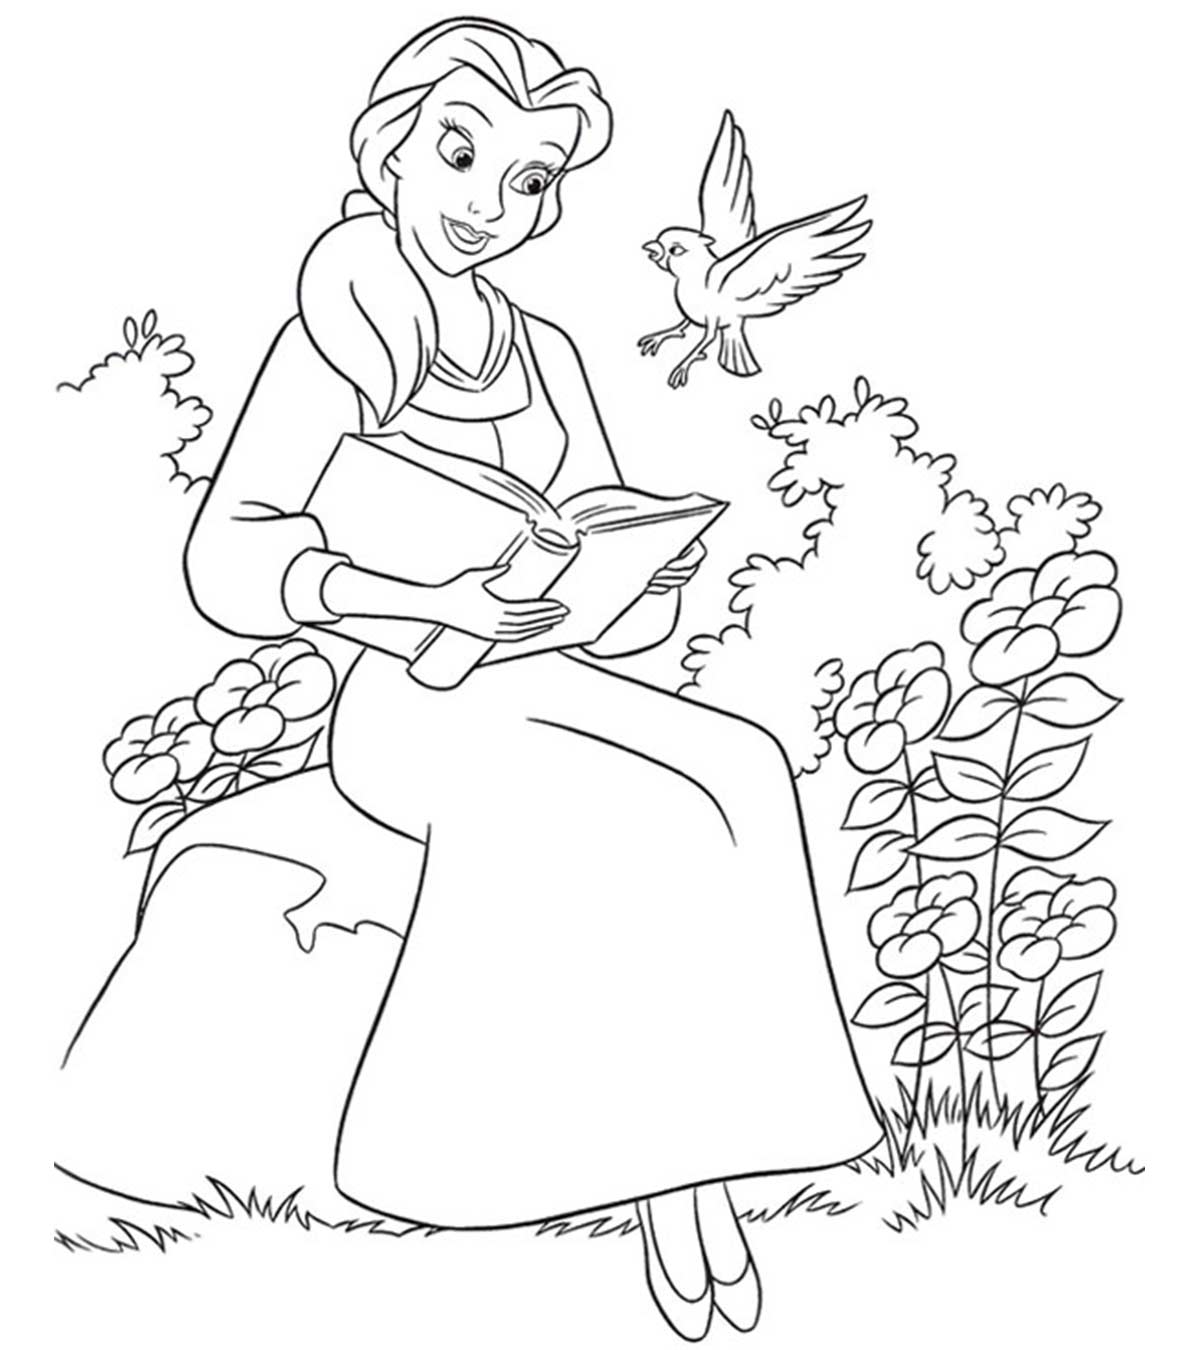 Printable Beauty And The Beast Coloring Page for kids.